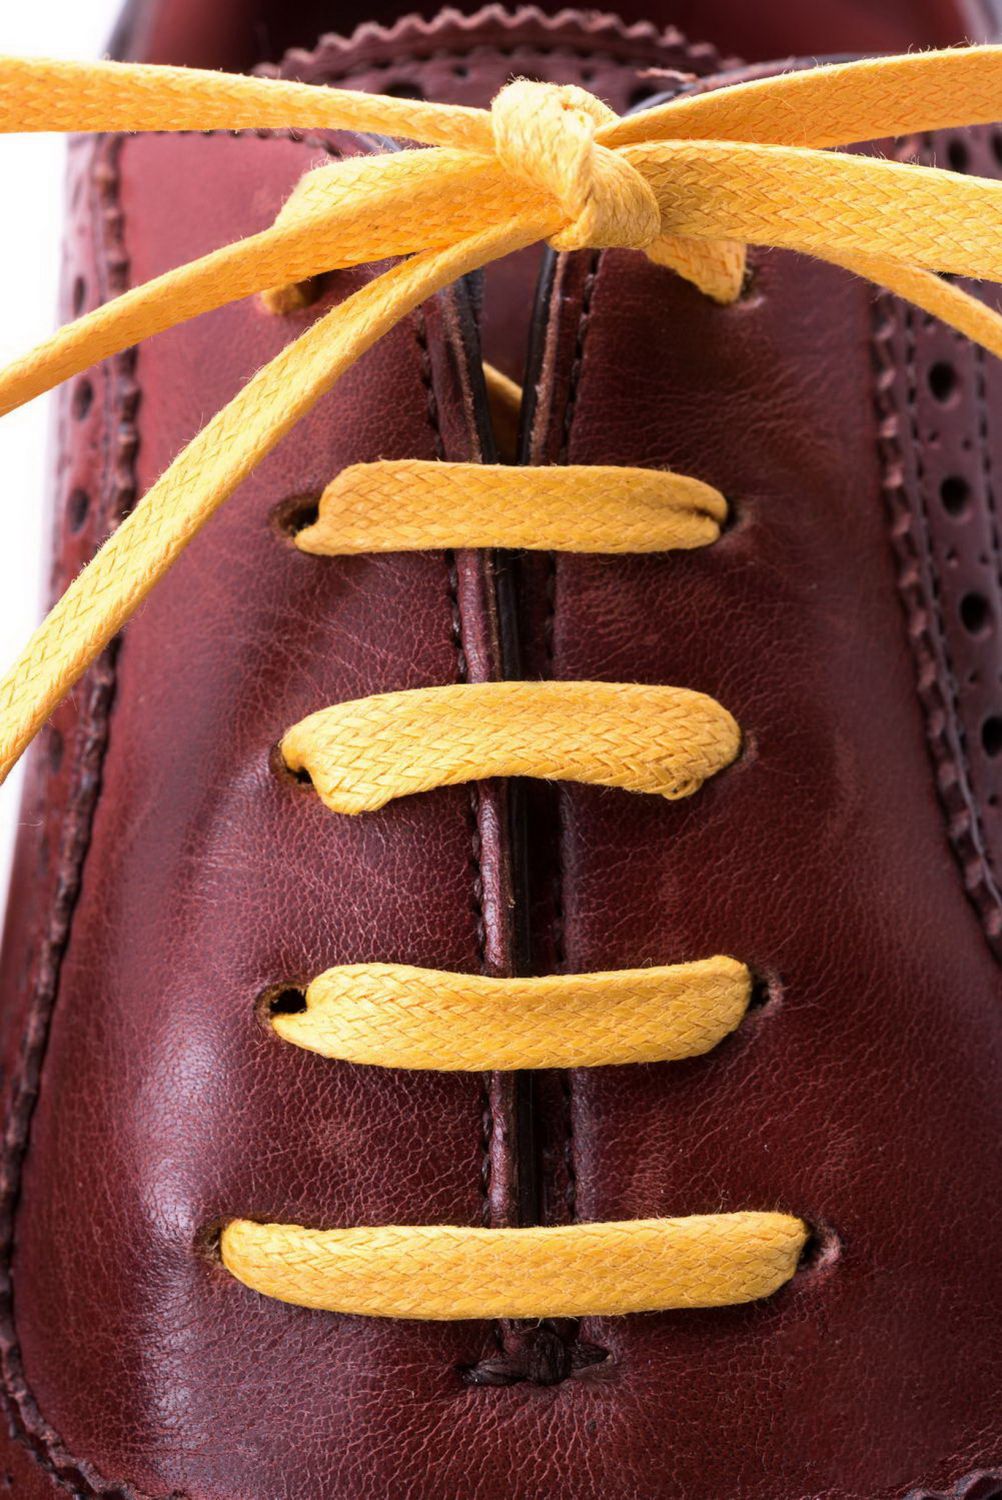 A New Pair Flat Yellow Cotton Waxed Dress Casual Shoelaces 3mm Laces 30" 